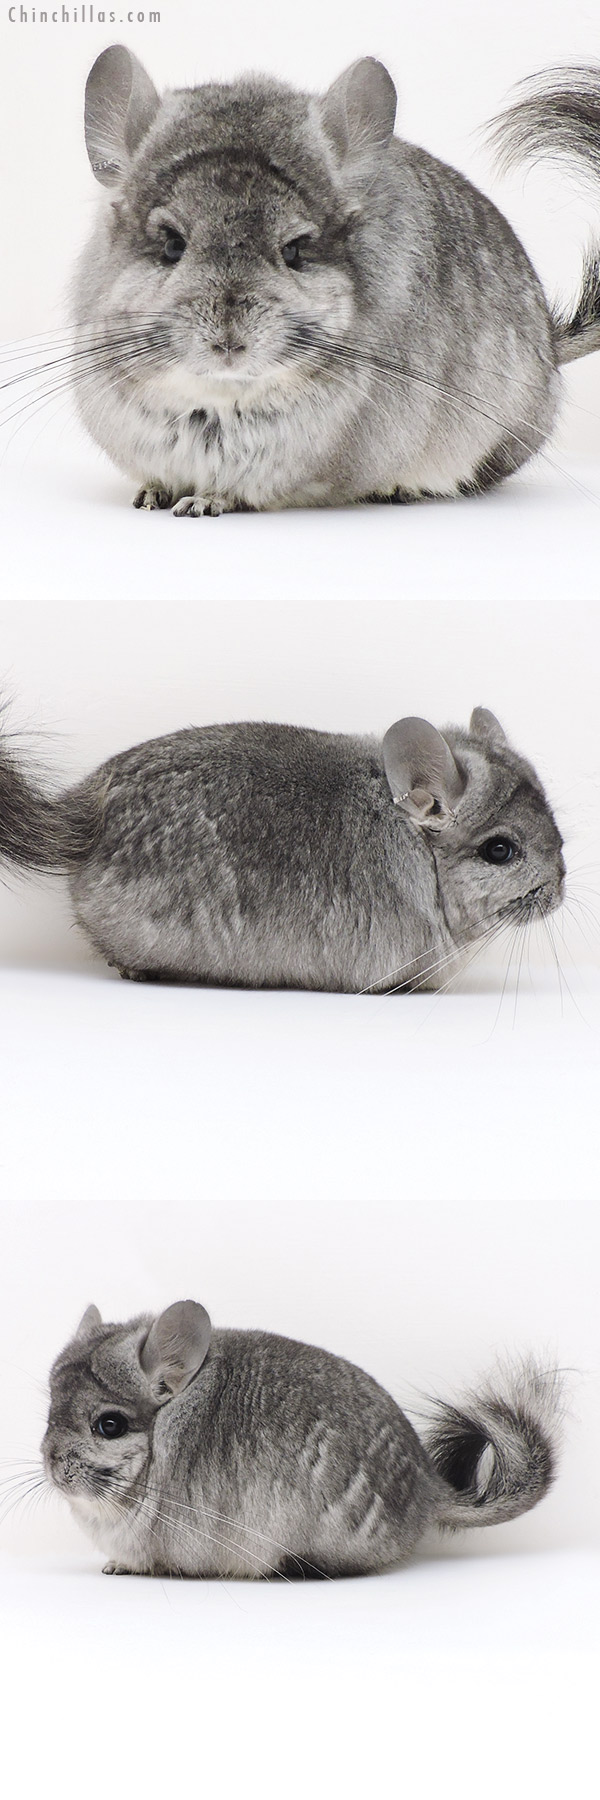 Chinchilla or related item offered for sale or export on Chinchillas.com - 17212 Standard ( Ebony & Locken Carrier )  Royal Persian Angora Male Chinchilla